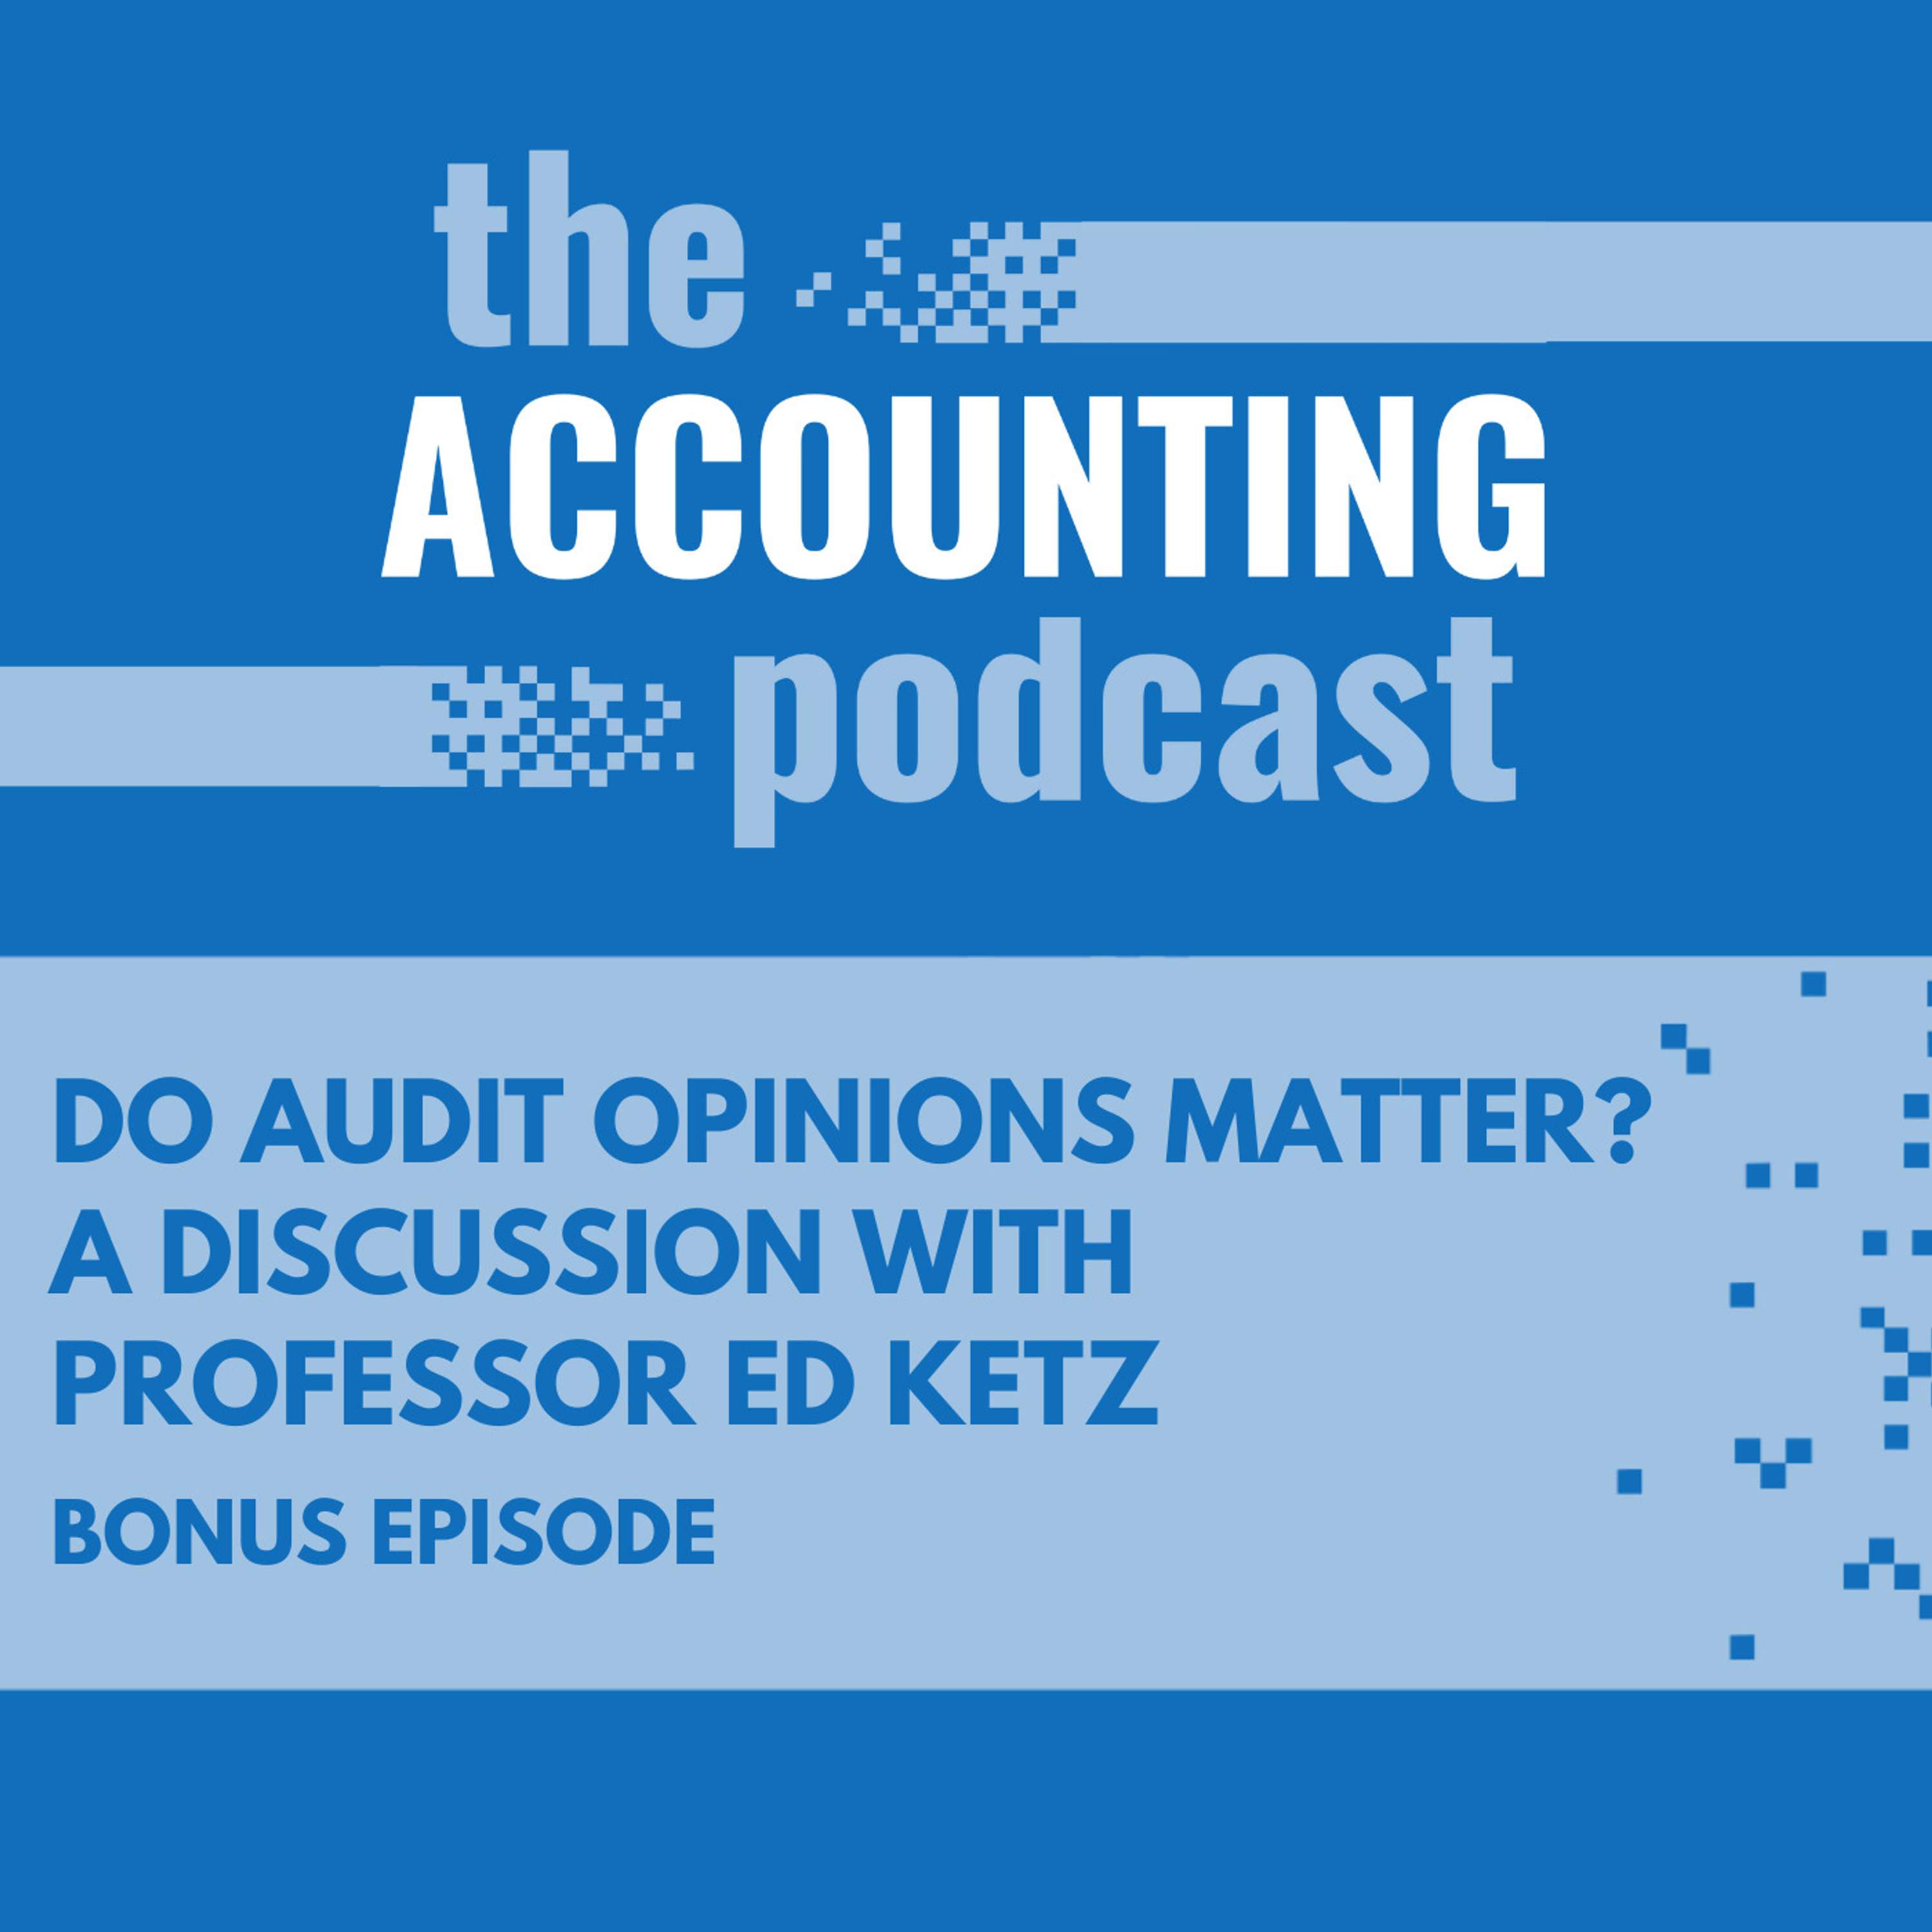 Do Audit Opinions Matter? A Discussion with Professor Ed Ketz